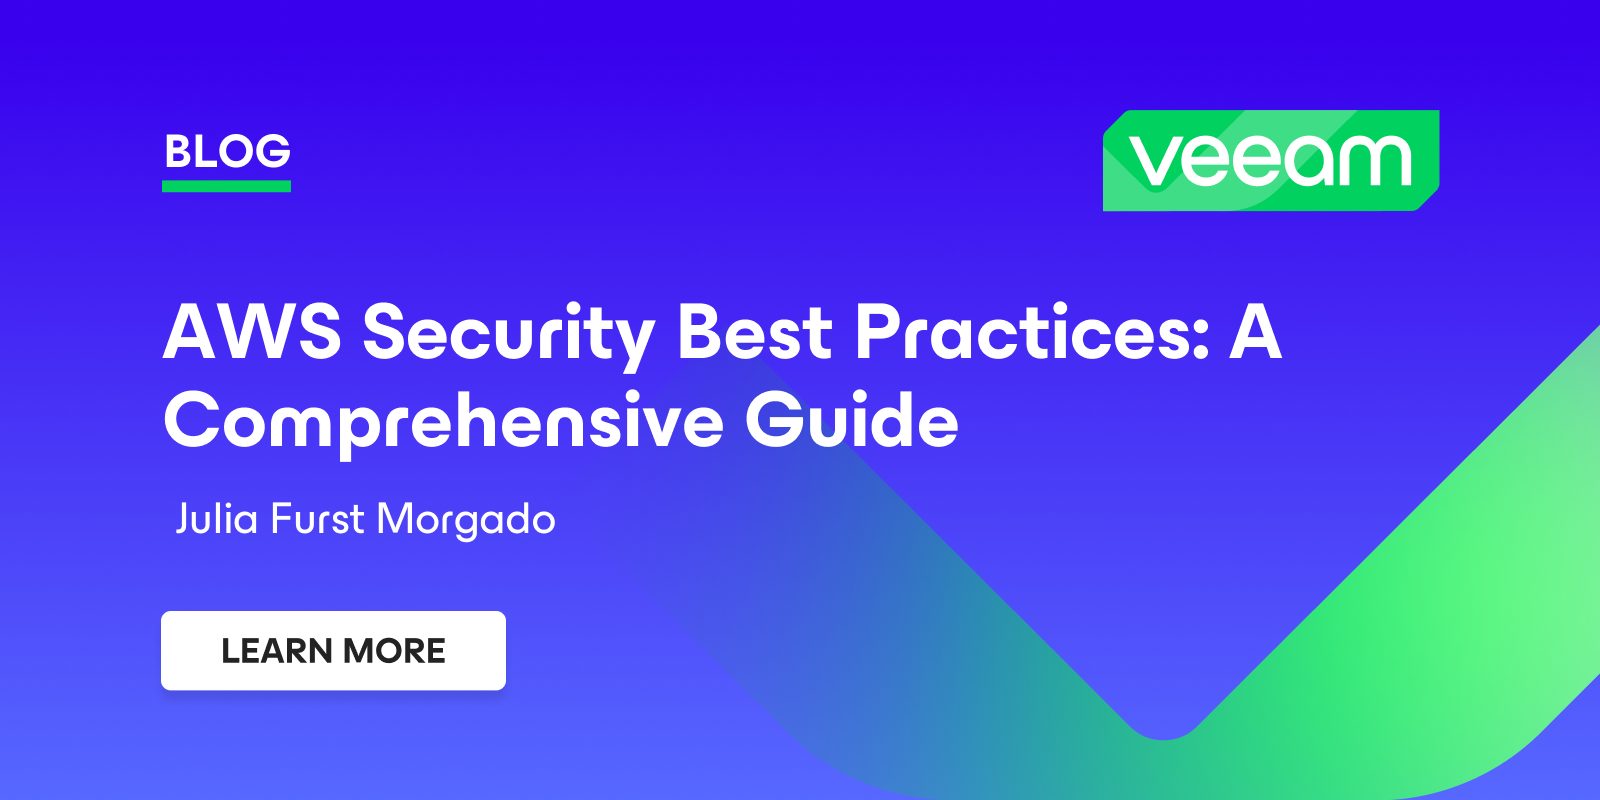 AWS Security Best Practices: A Comprehensive Guide